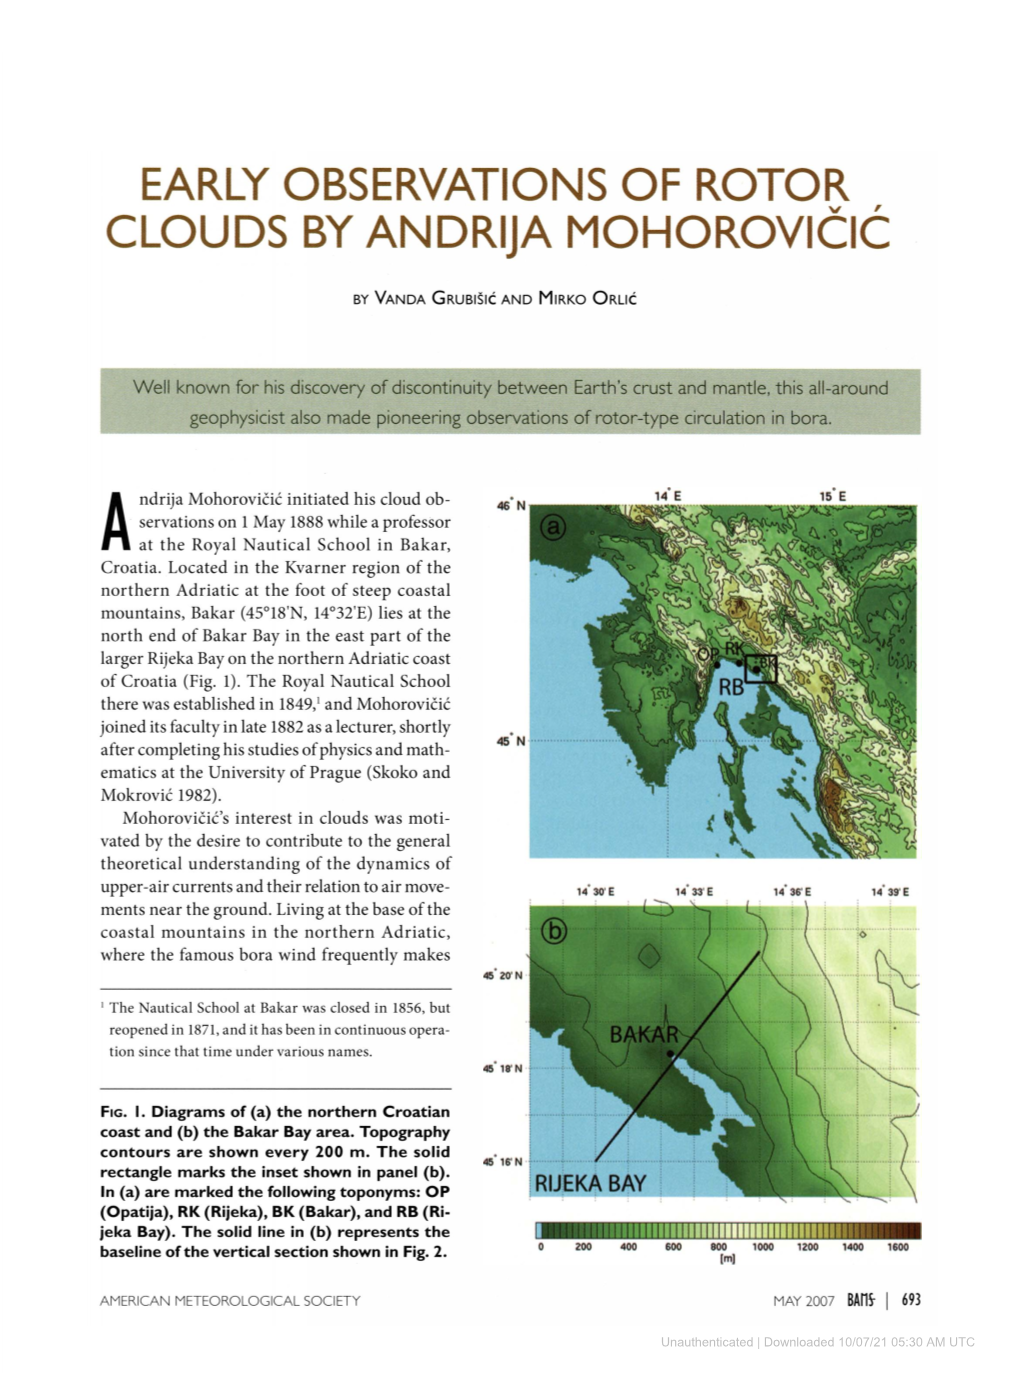 Early Observations of Rotor Clouds by Andrija Mohorovicic